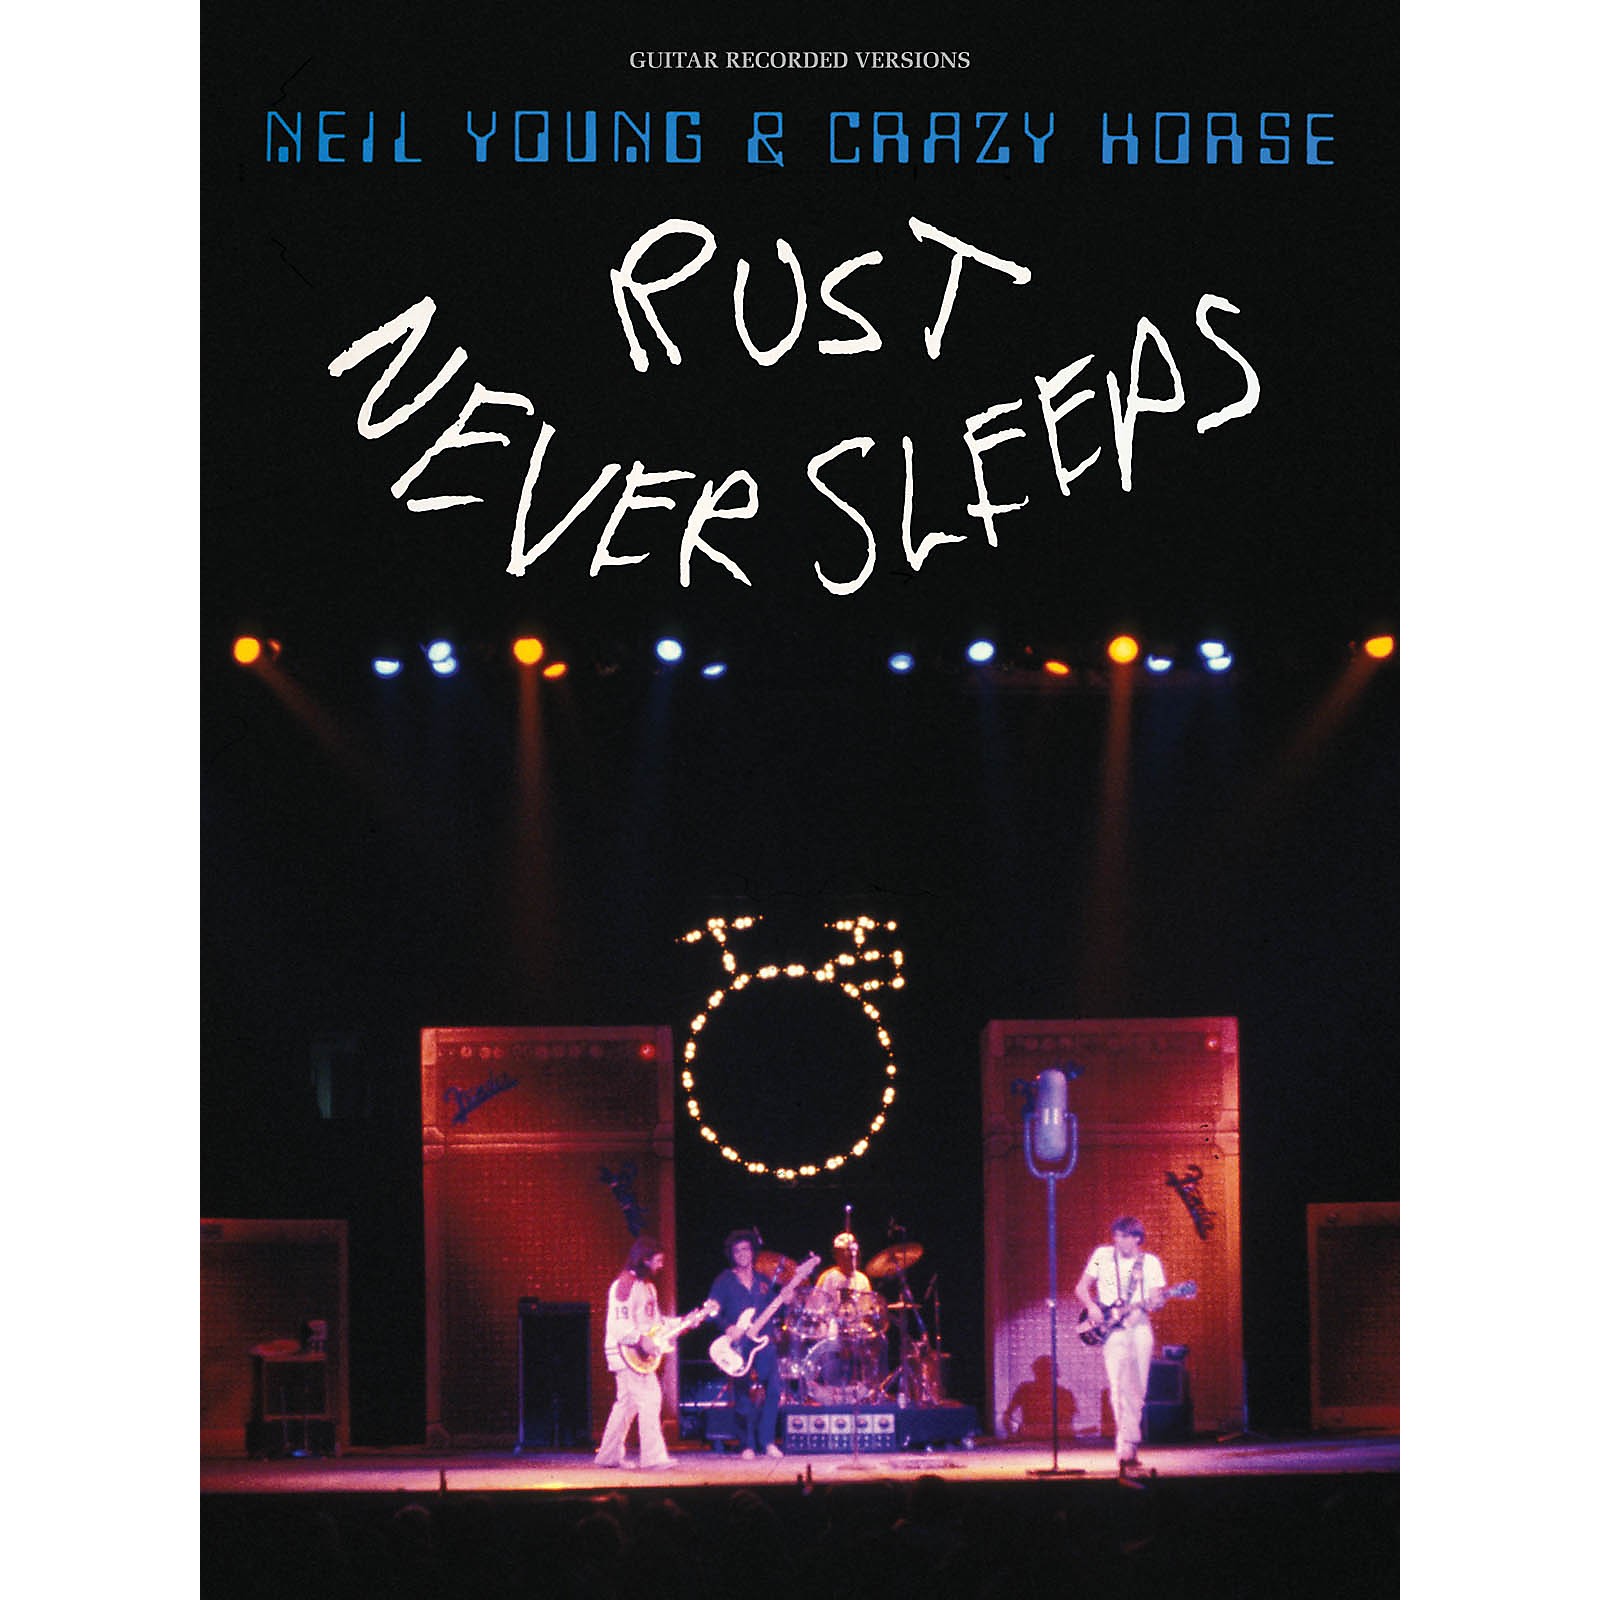 Neil young crazy horse rust never sleeps фото 17